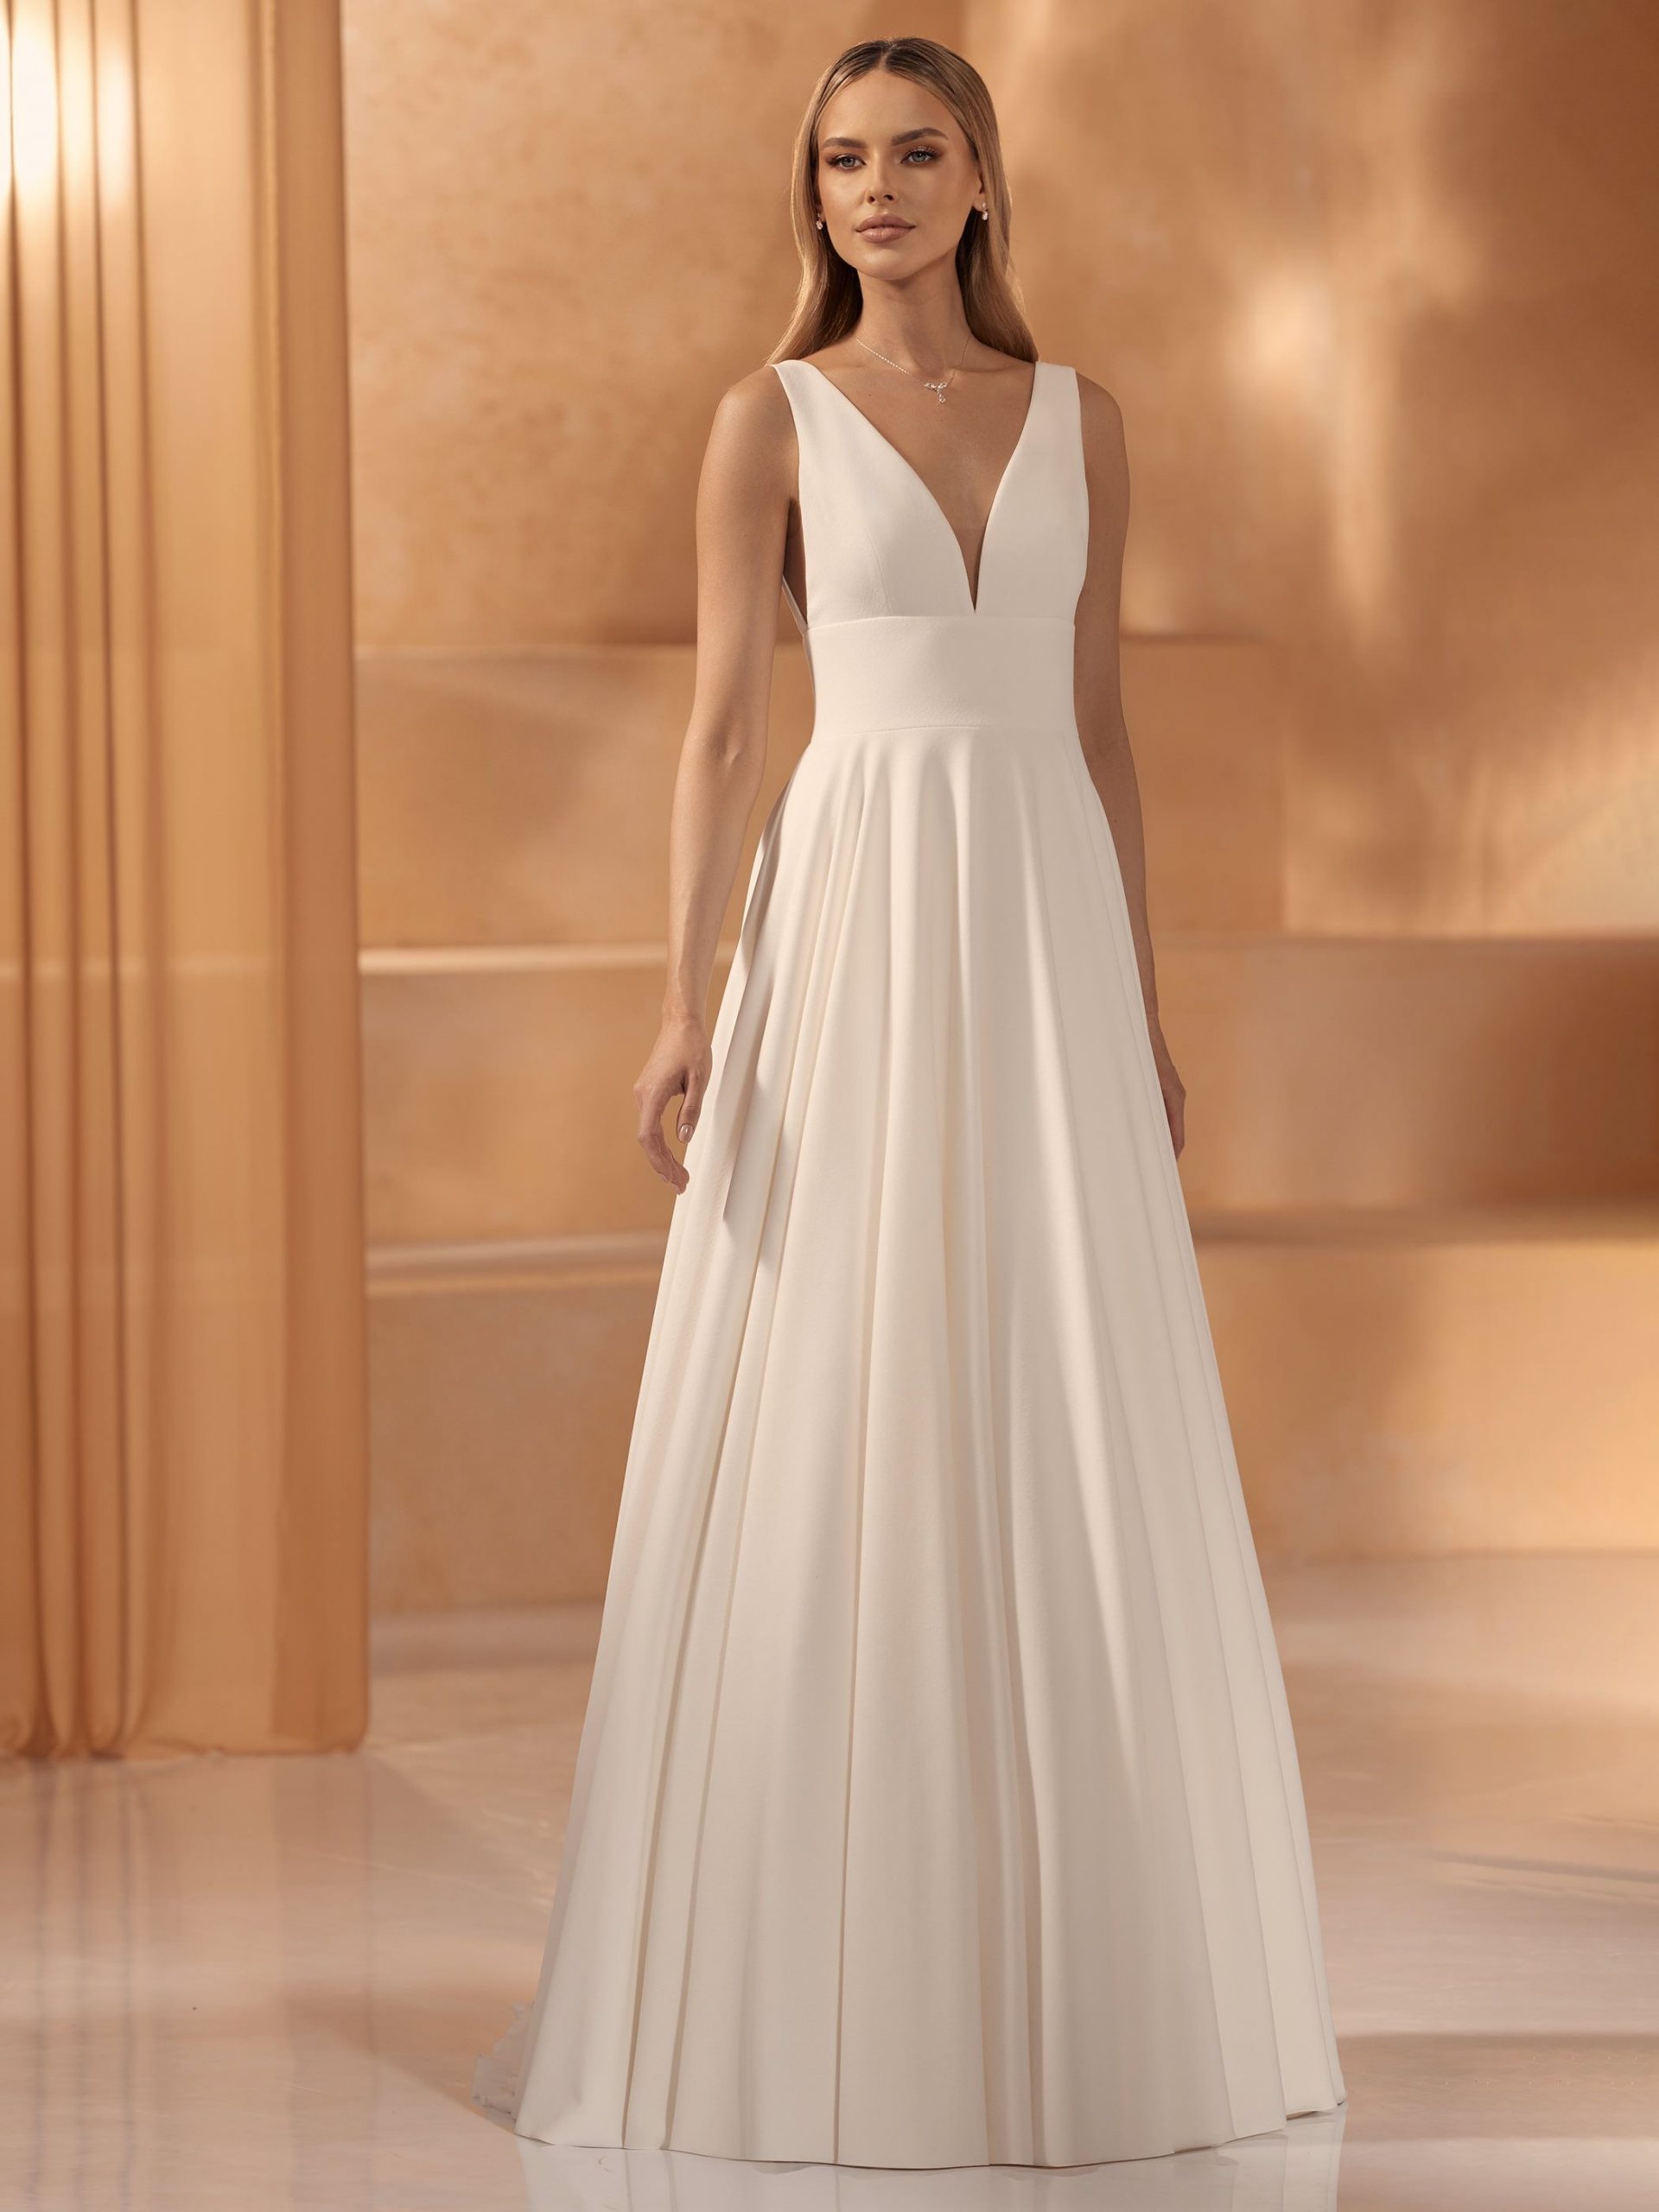 Photo shows a bride wearing a plain ivory crepe A-line wedding dress called Pola by Bianco Evento, featuring a low plunge neckline and wide waistband.